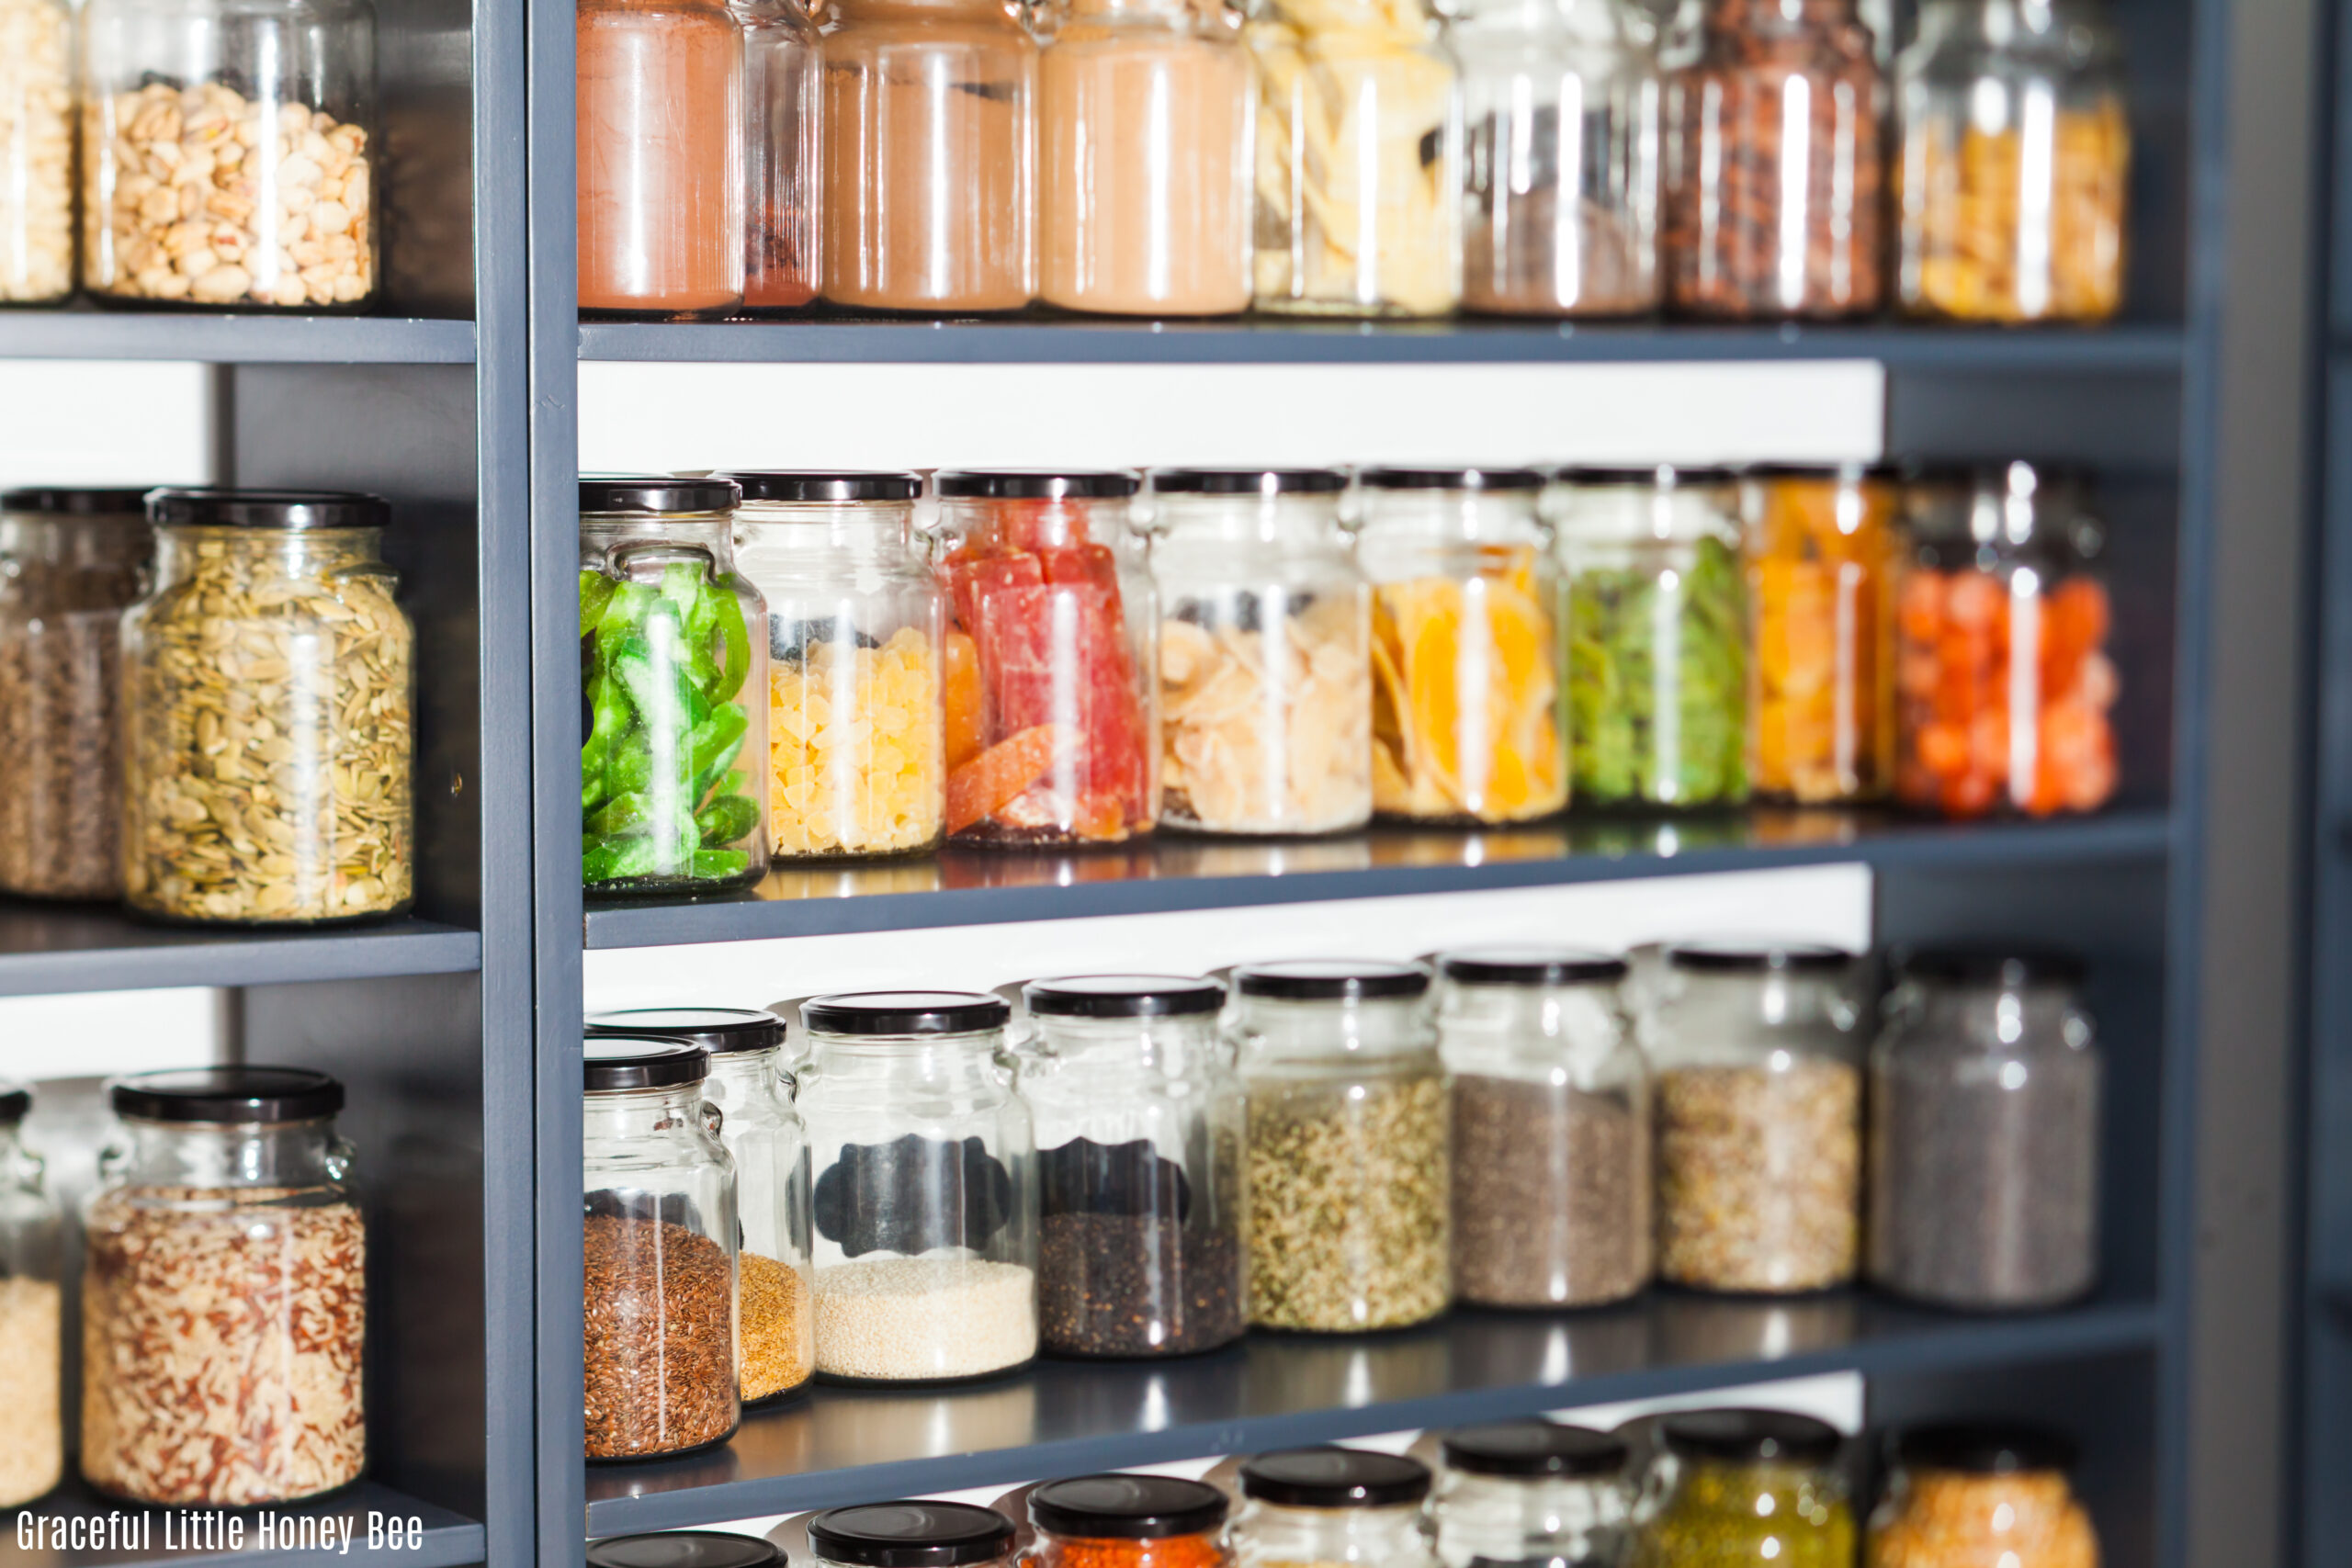 Jars filled with all colors of food sitting on a metal shelf.